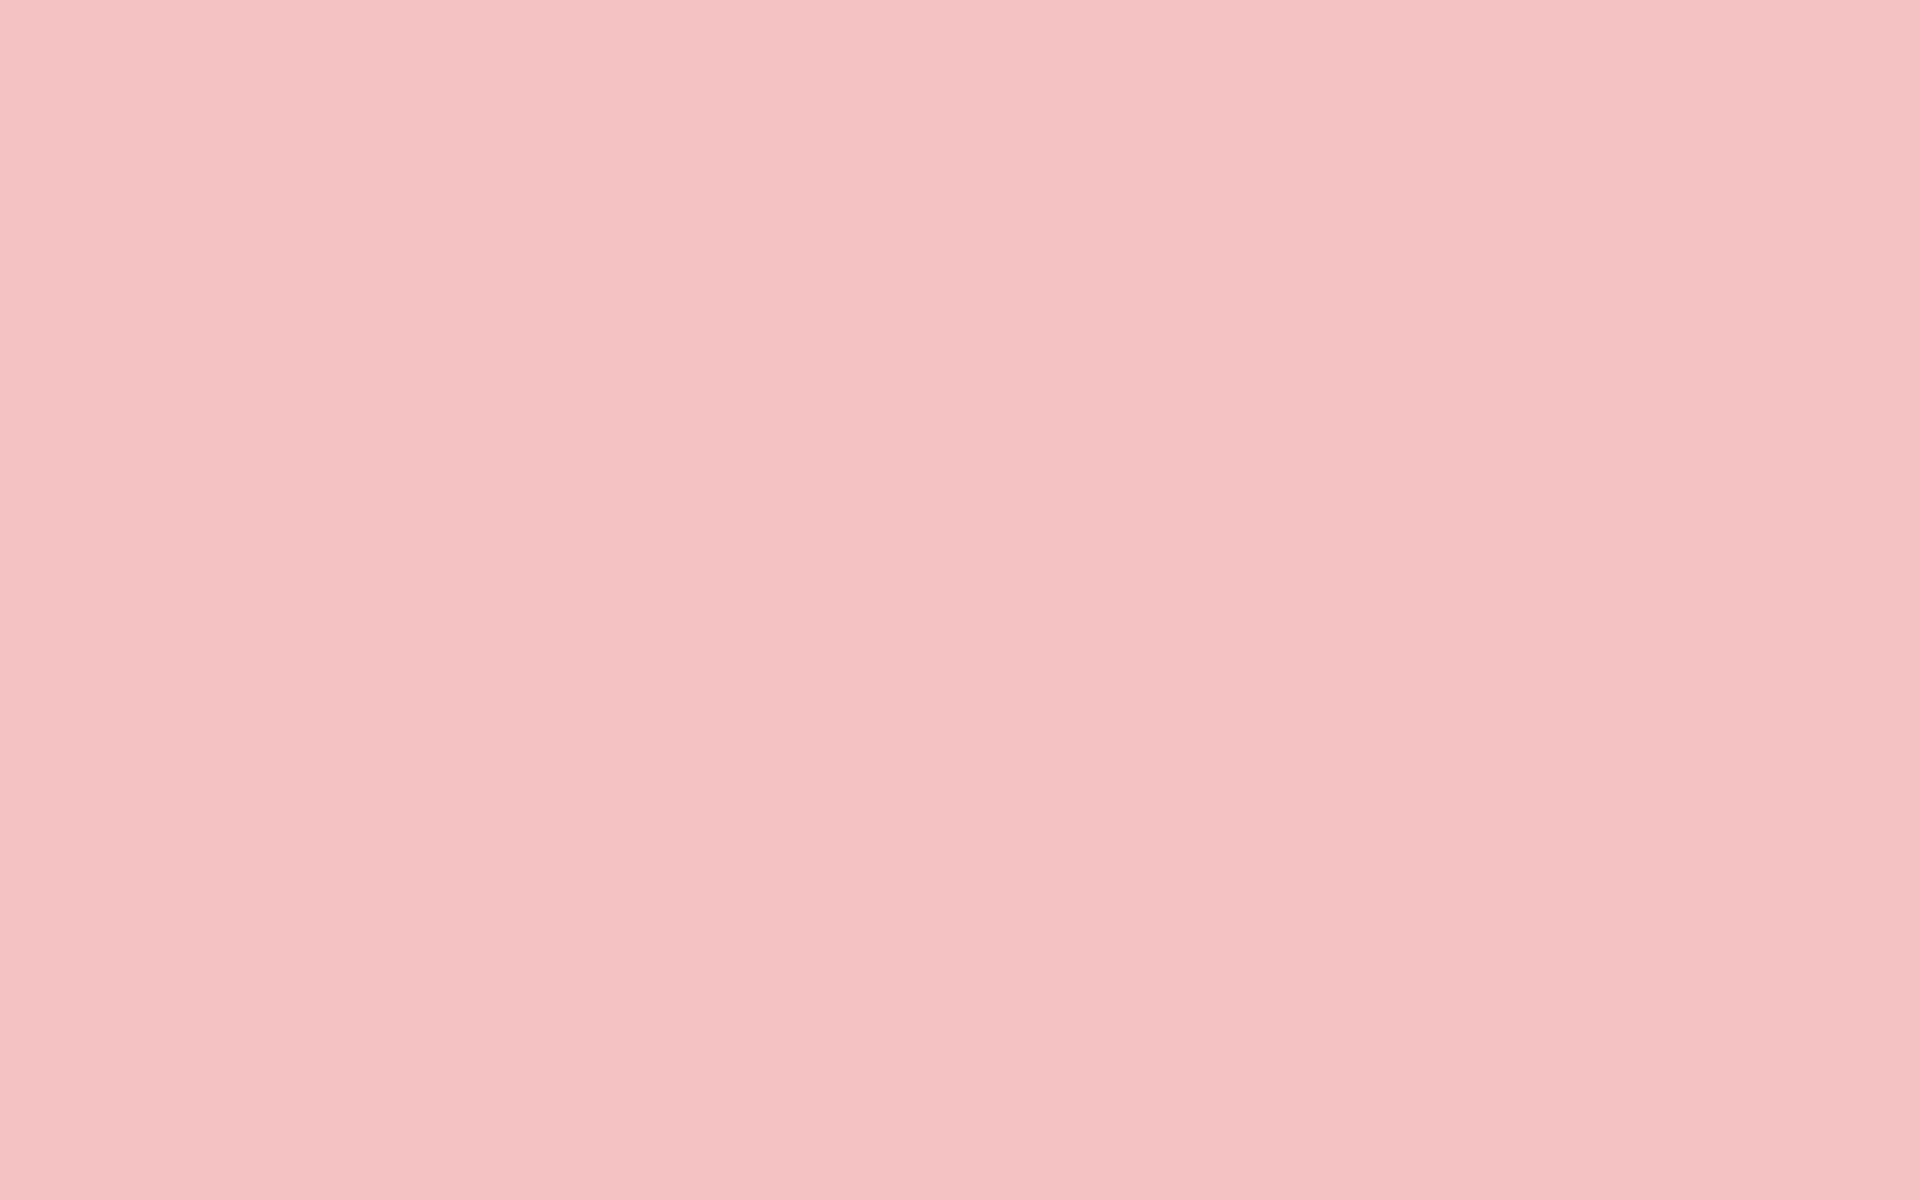 Free 1920x1200 resolution Baby Pink solid color background view and